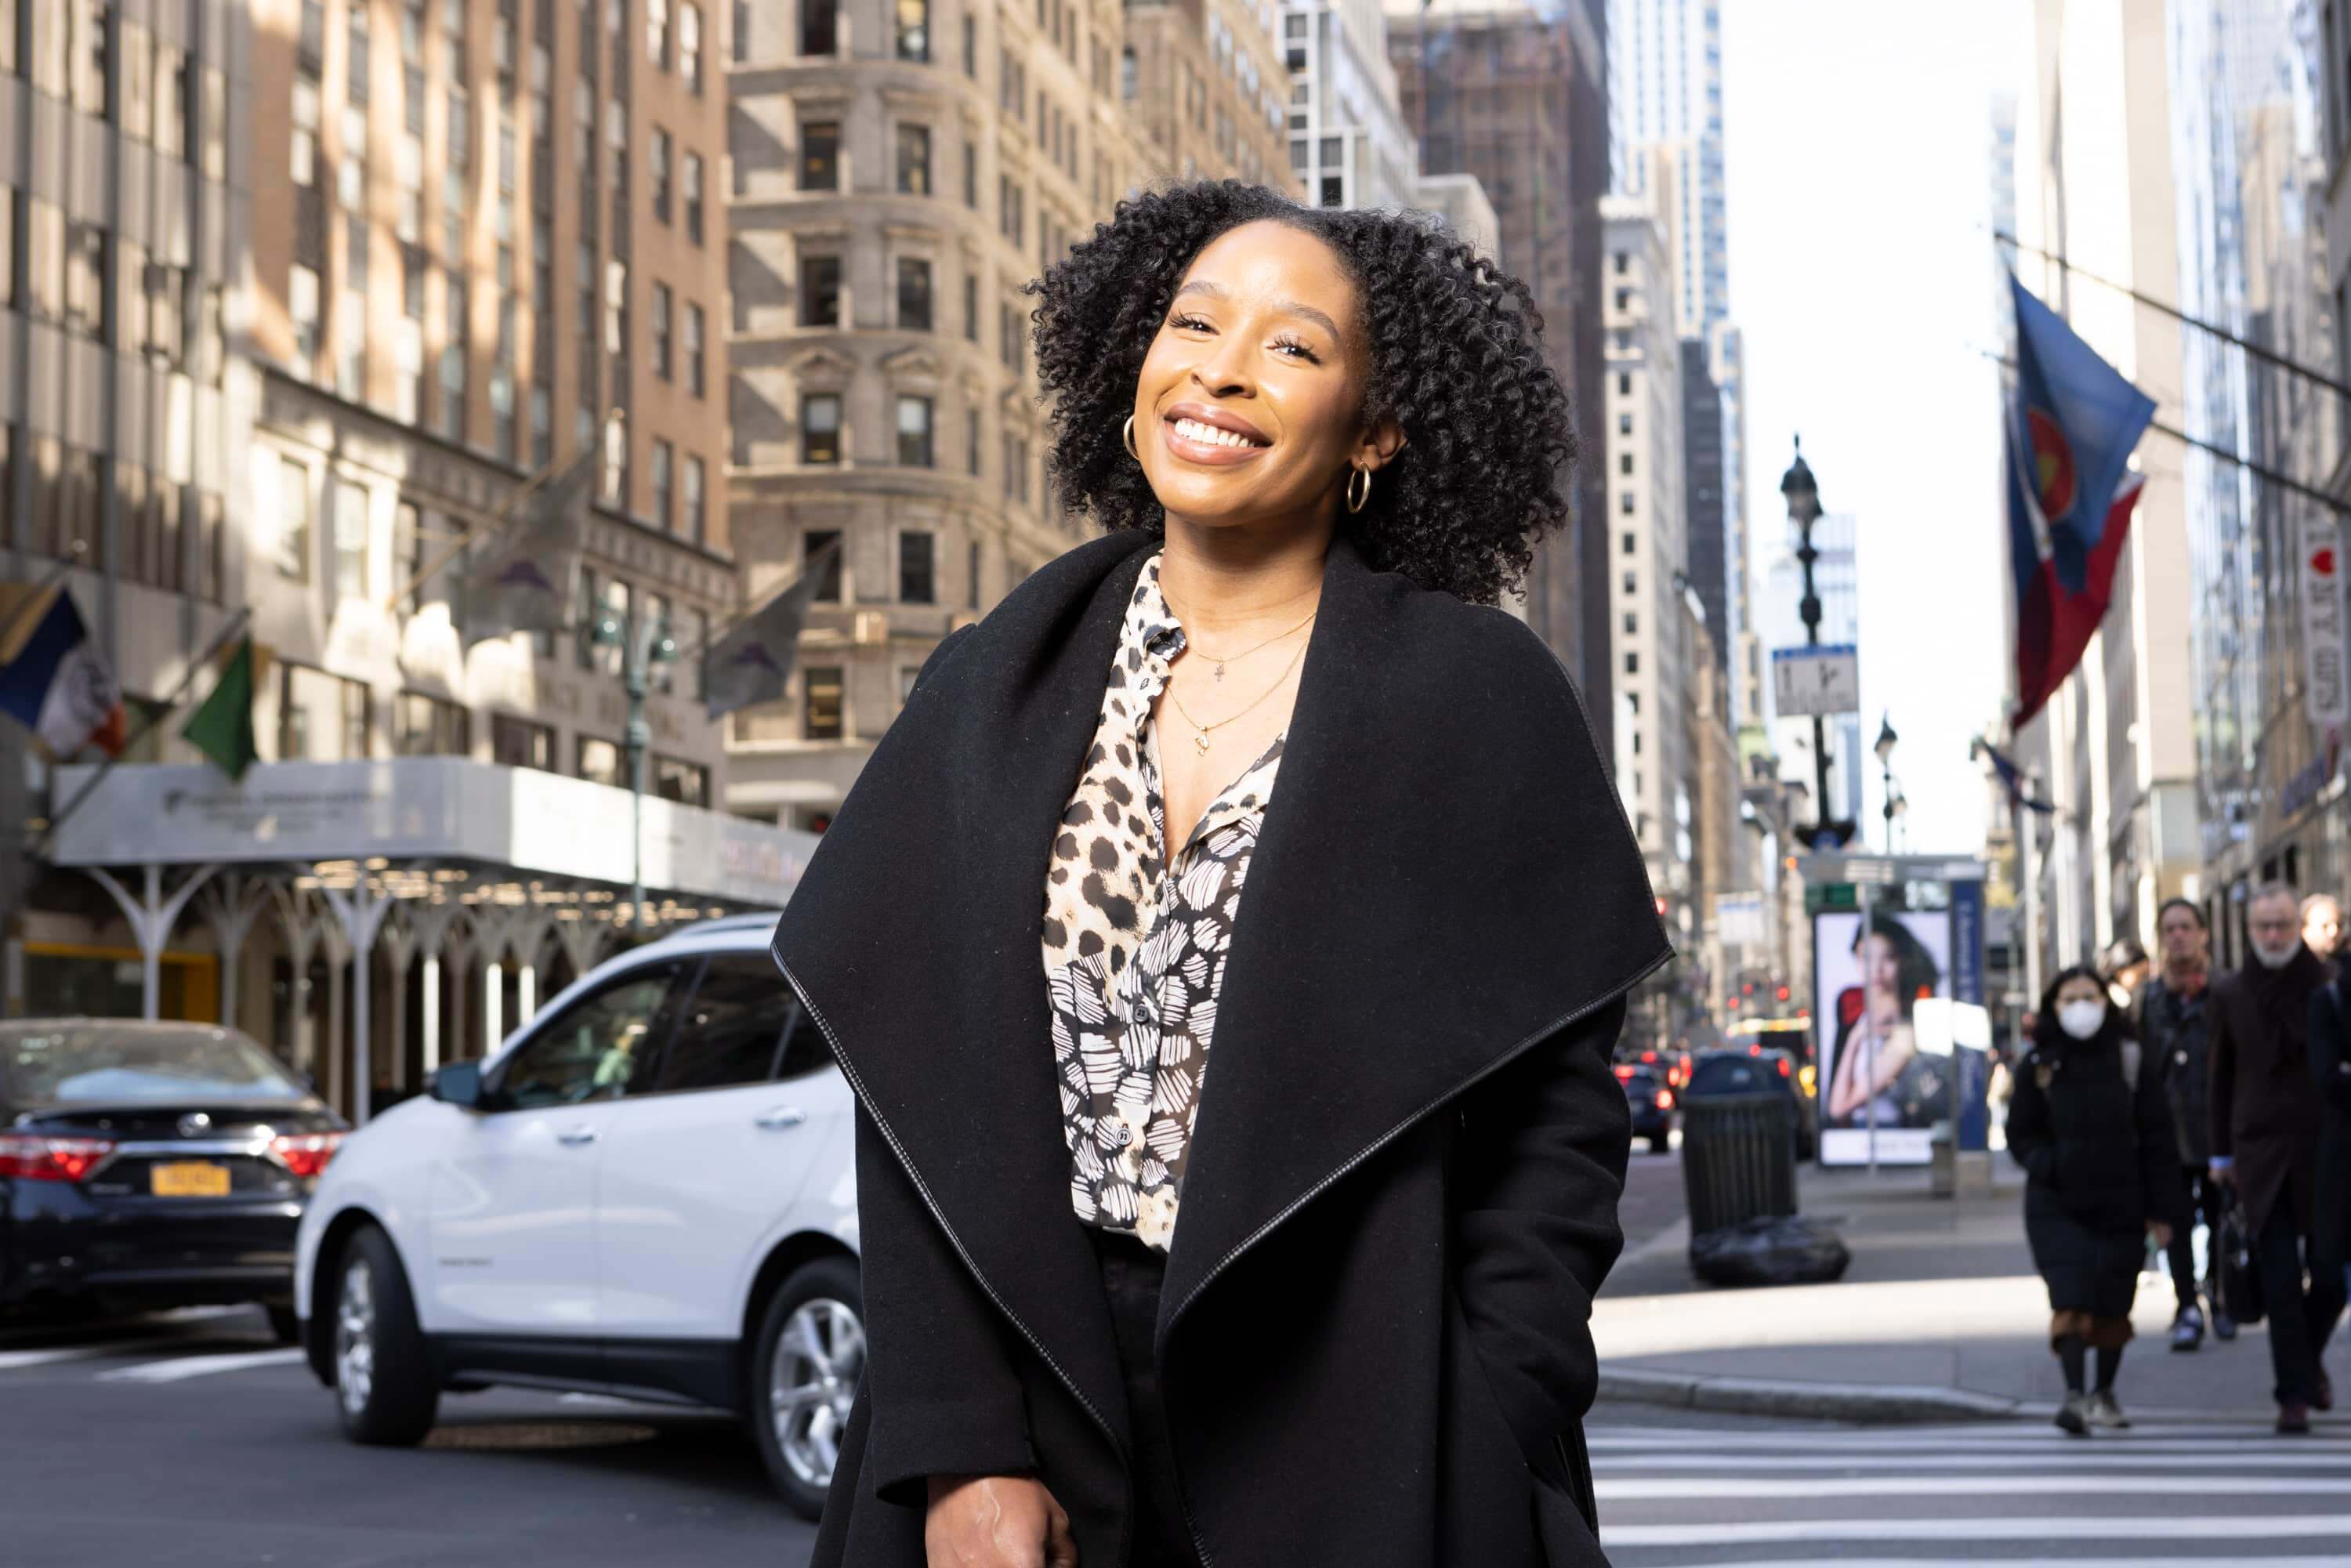 LIM alum Delisha Fields wears a black winter coat and smiles as she stands near the Met Life building in NYC